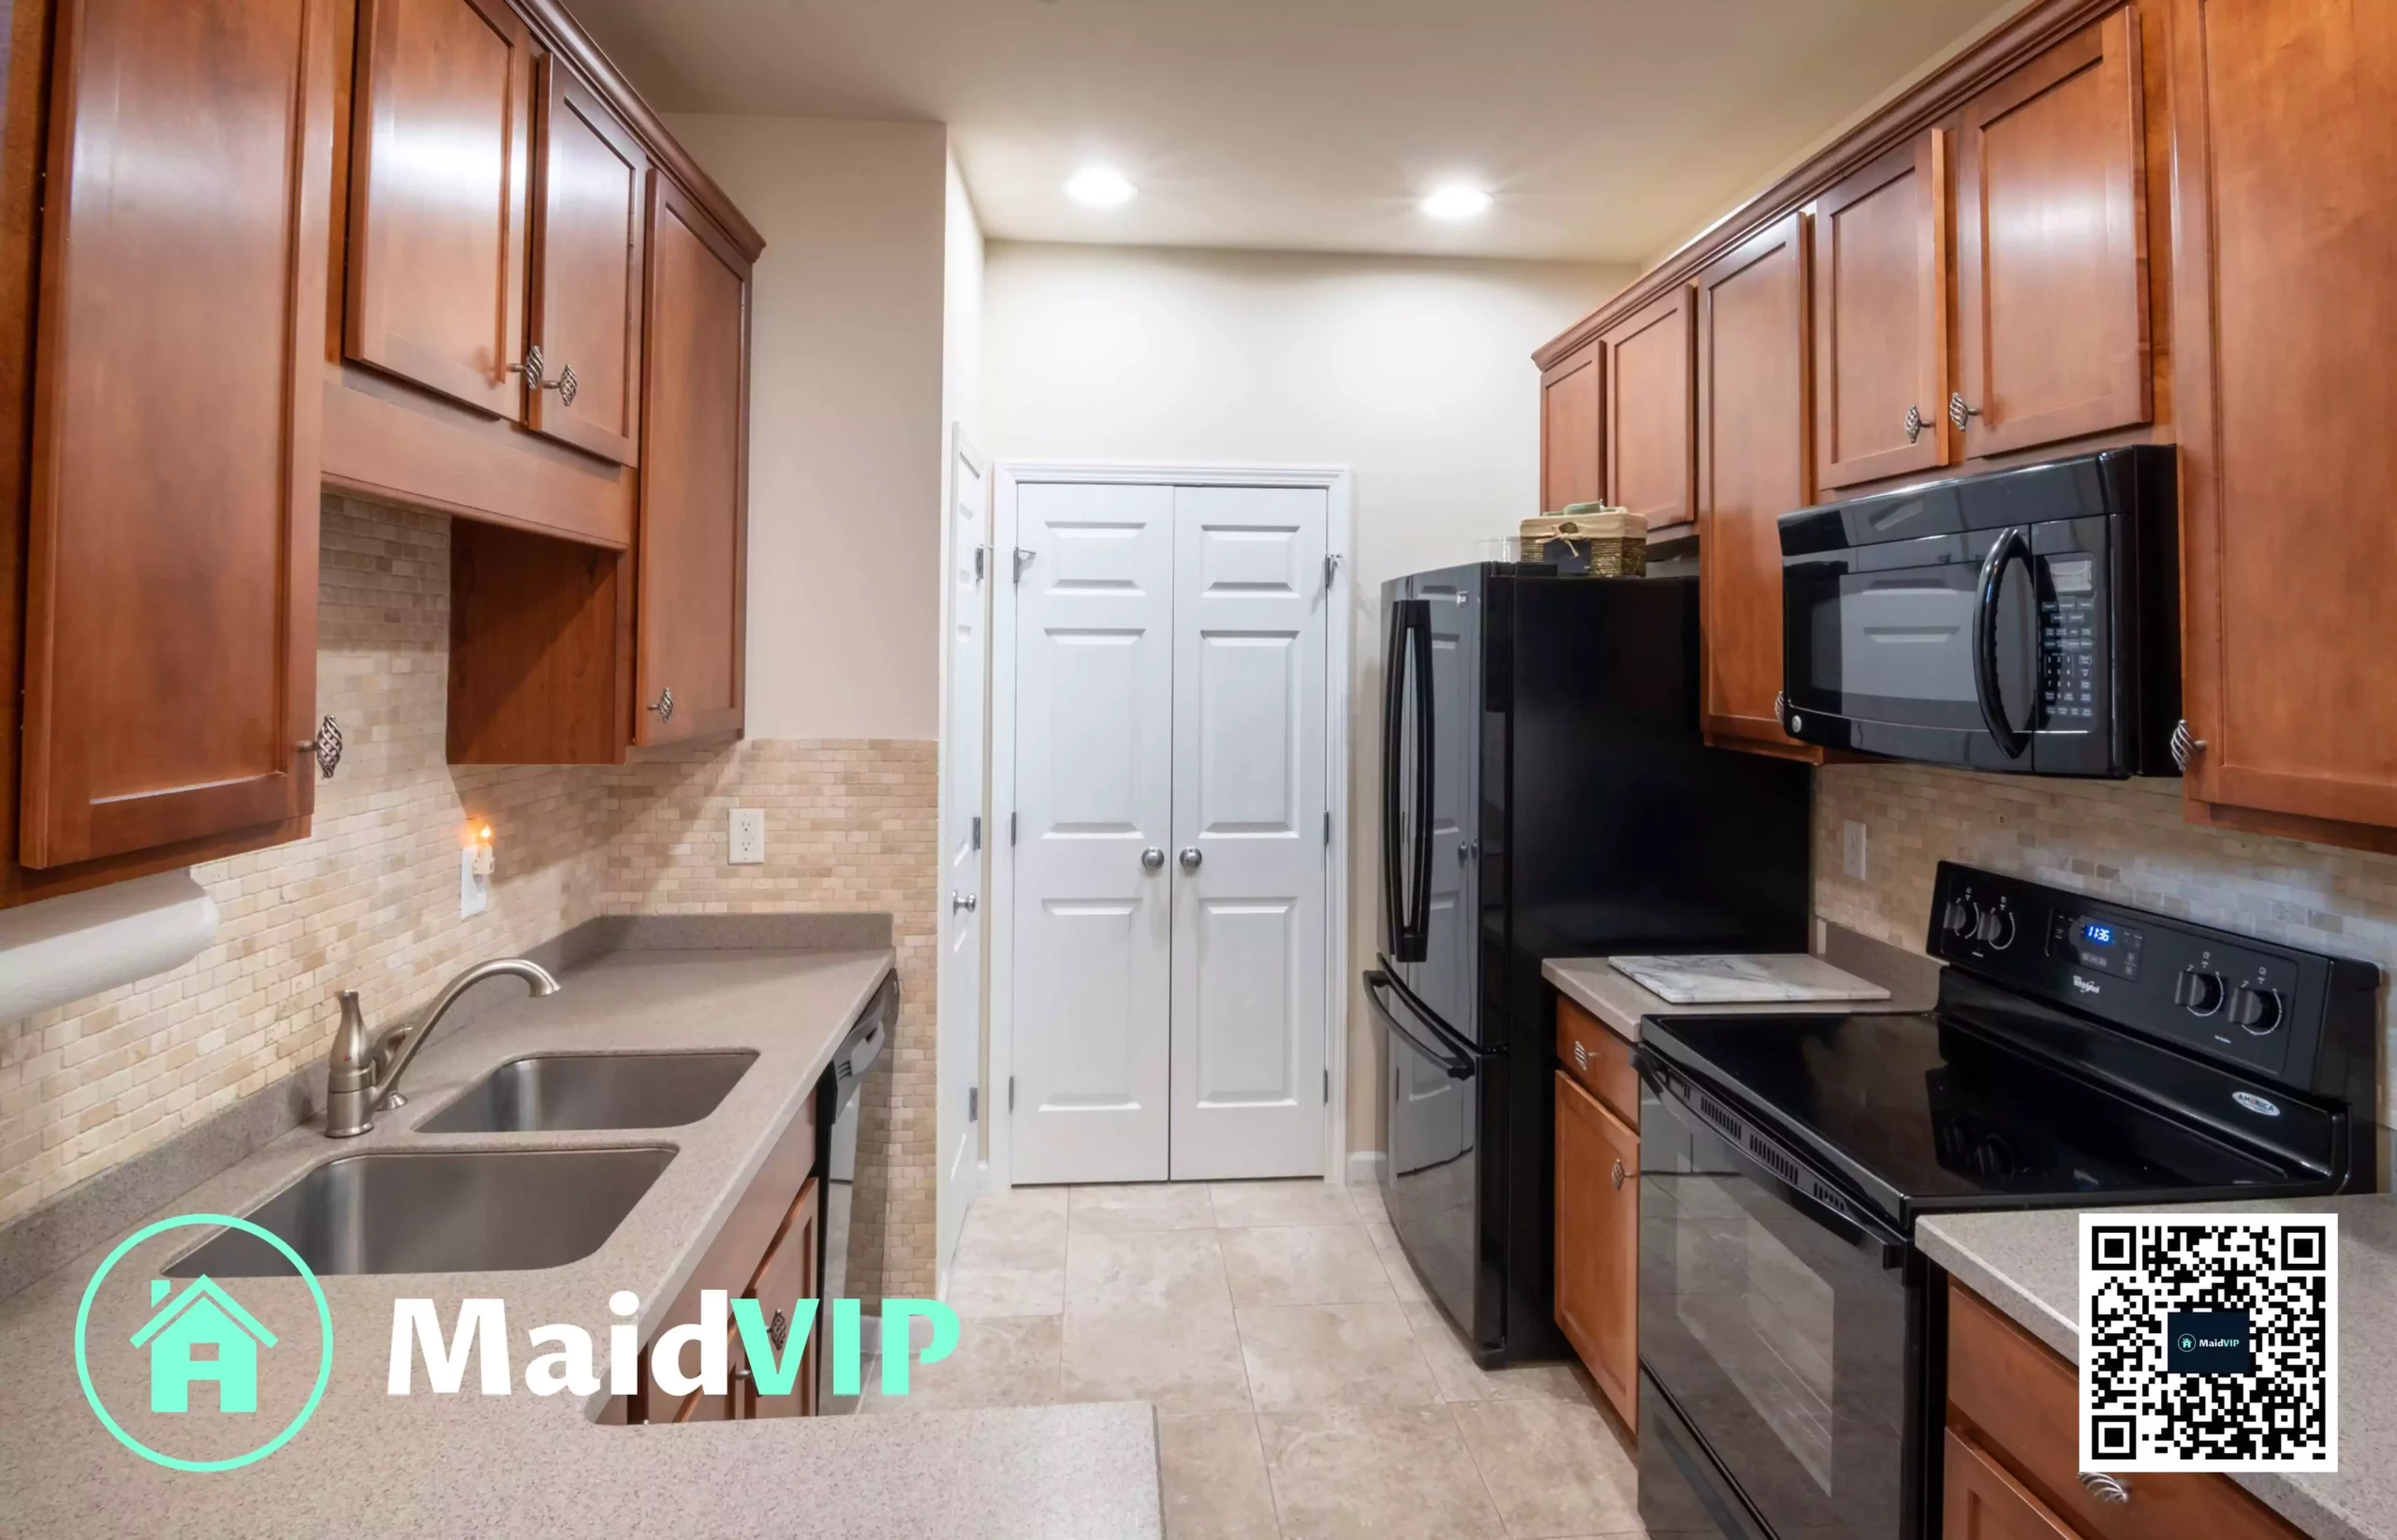 Maid VIP Canoga Park House Cleaning Services